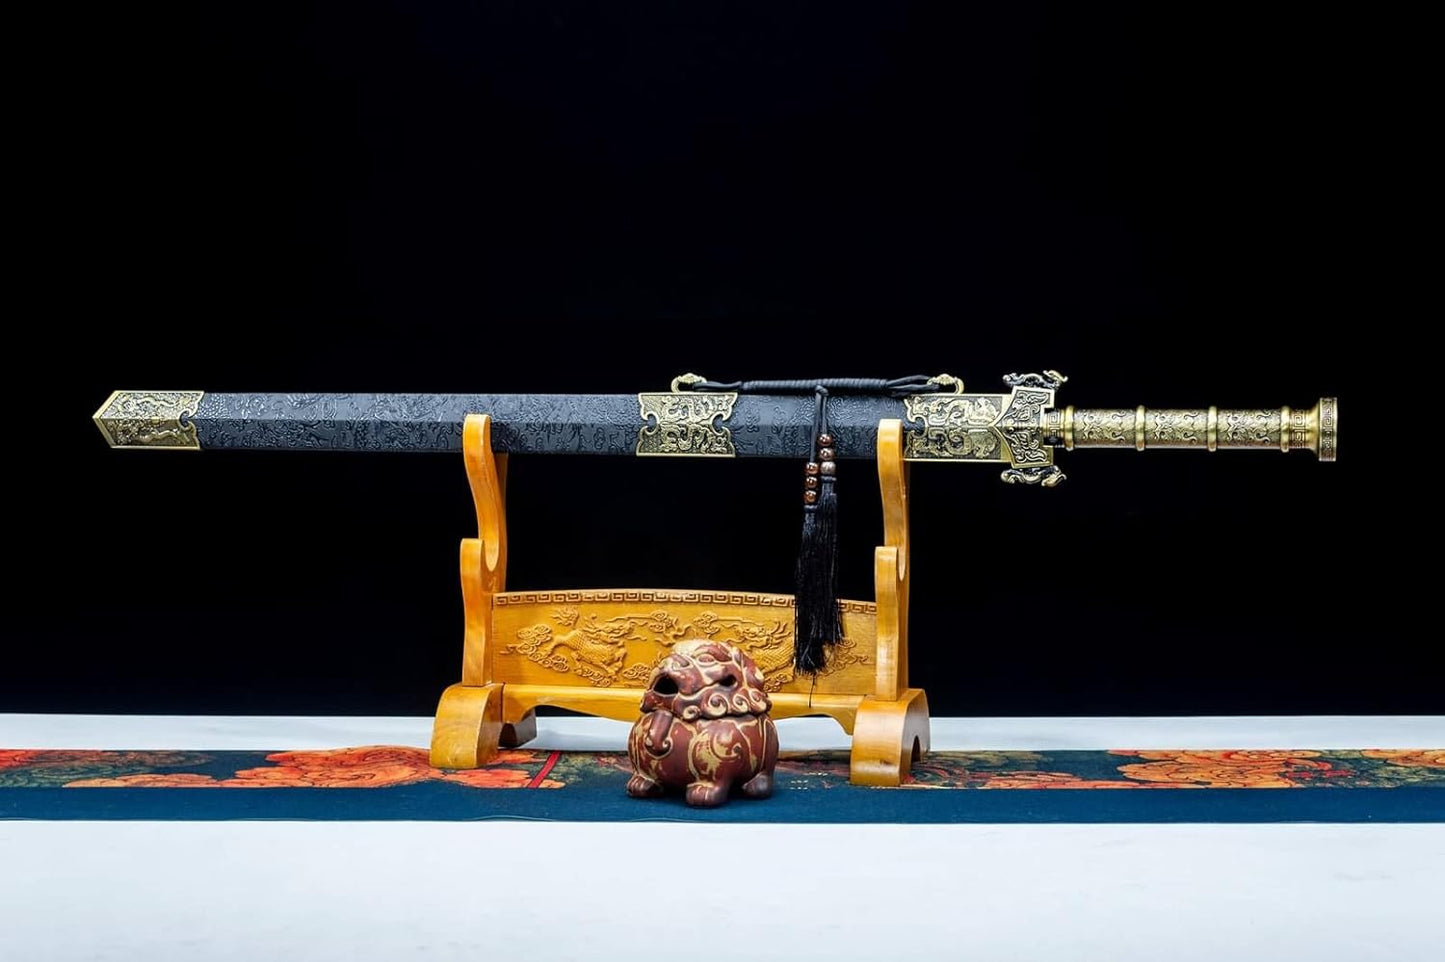 Authentic Han Jian Sword with High Carbon Steel Blade - Alloy Fittings